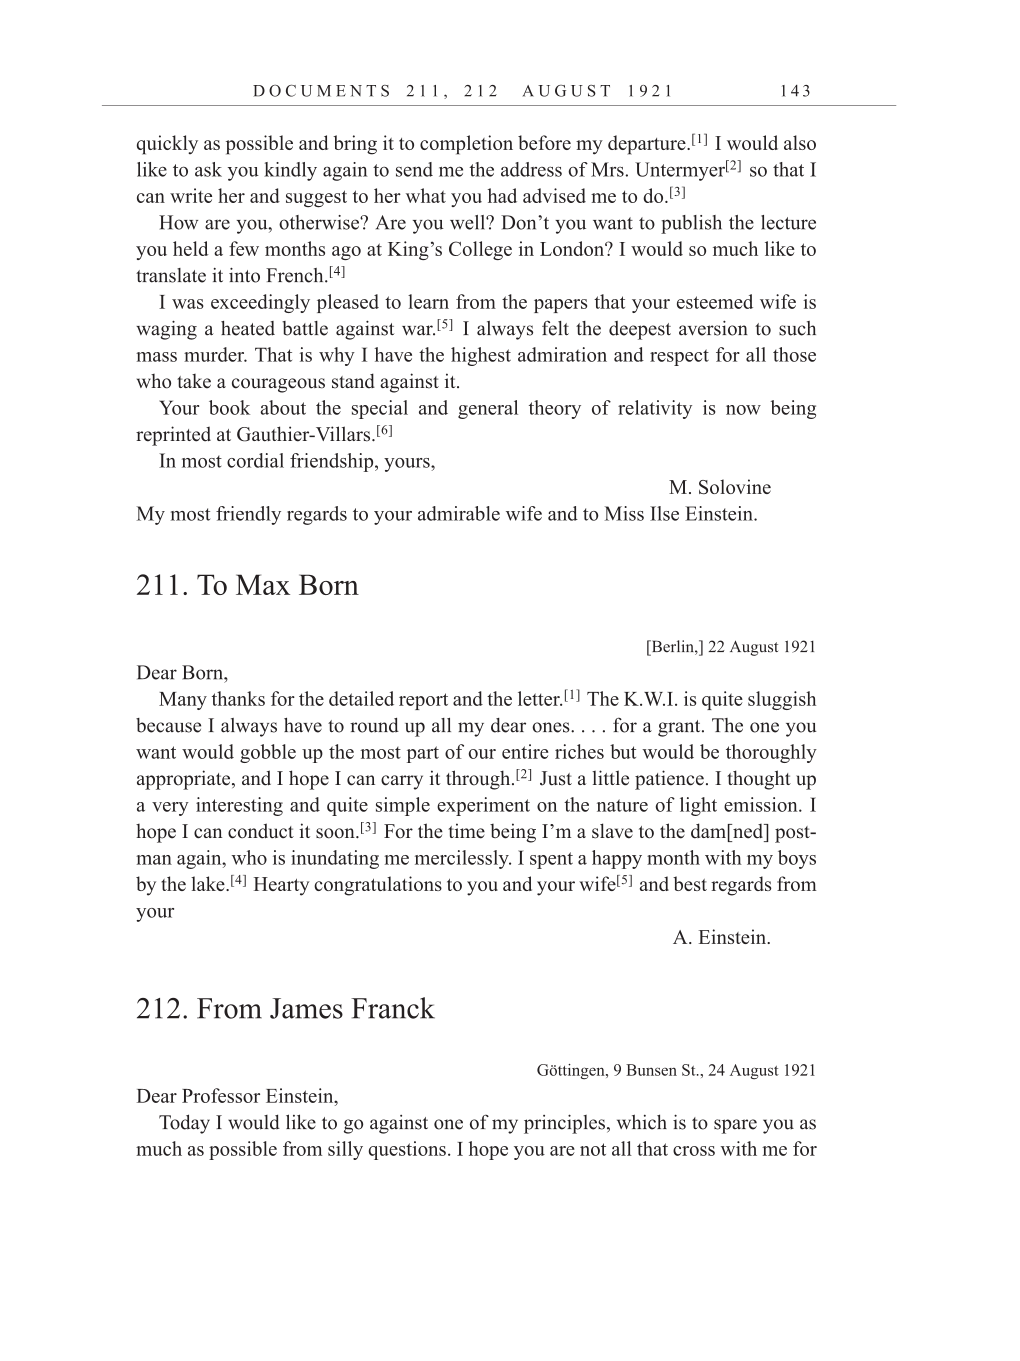 Volume 12: The Berlin Years: Correspondence, January-December 1921 (English translation supplement) page 143